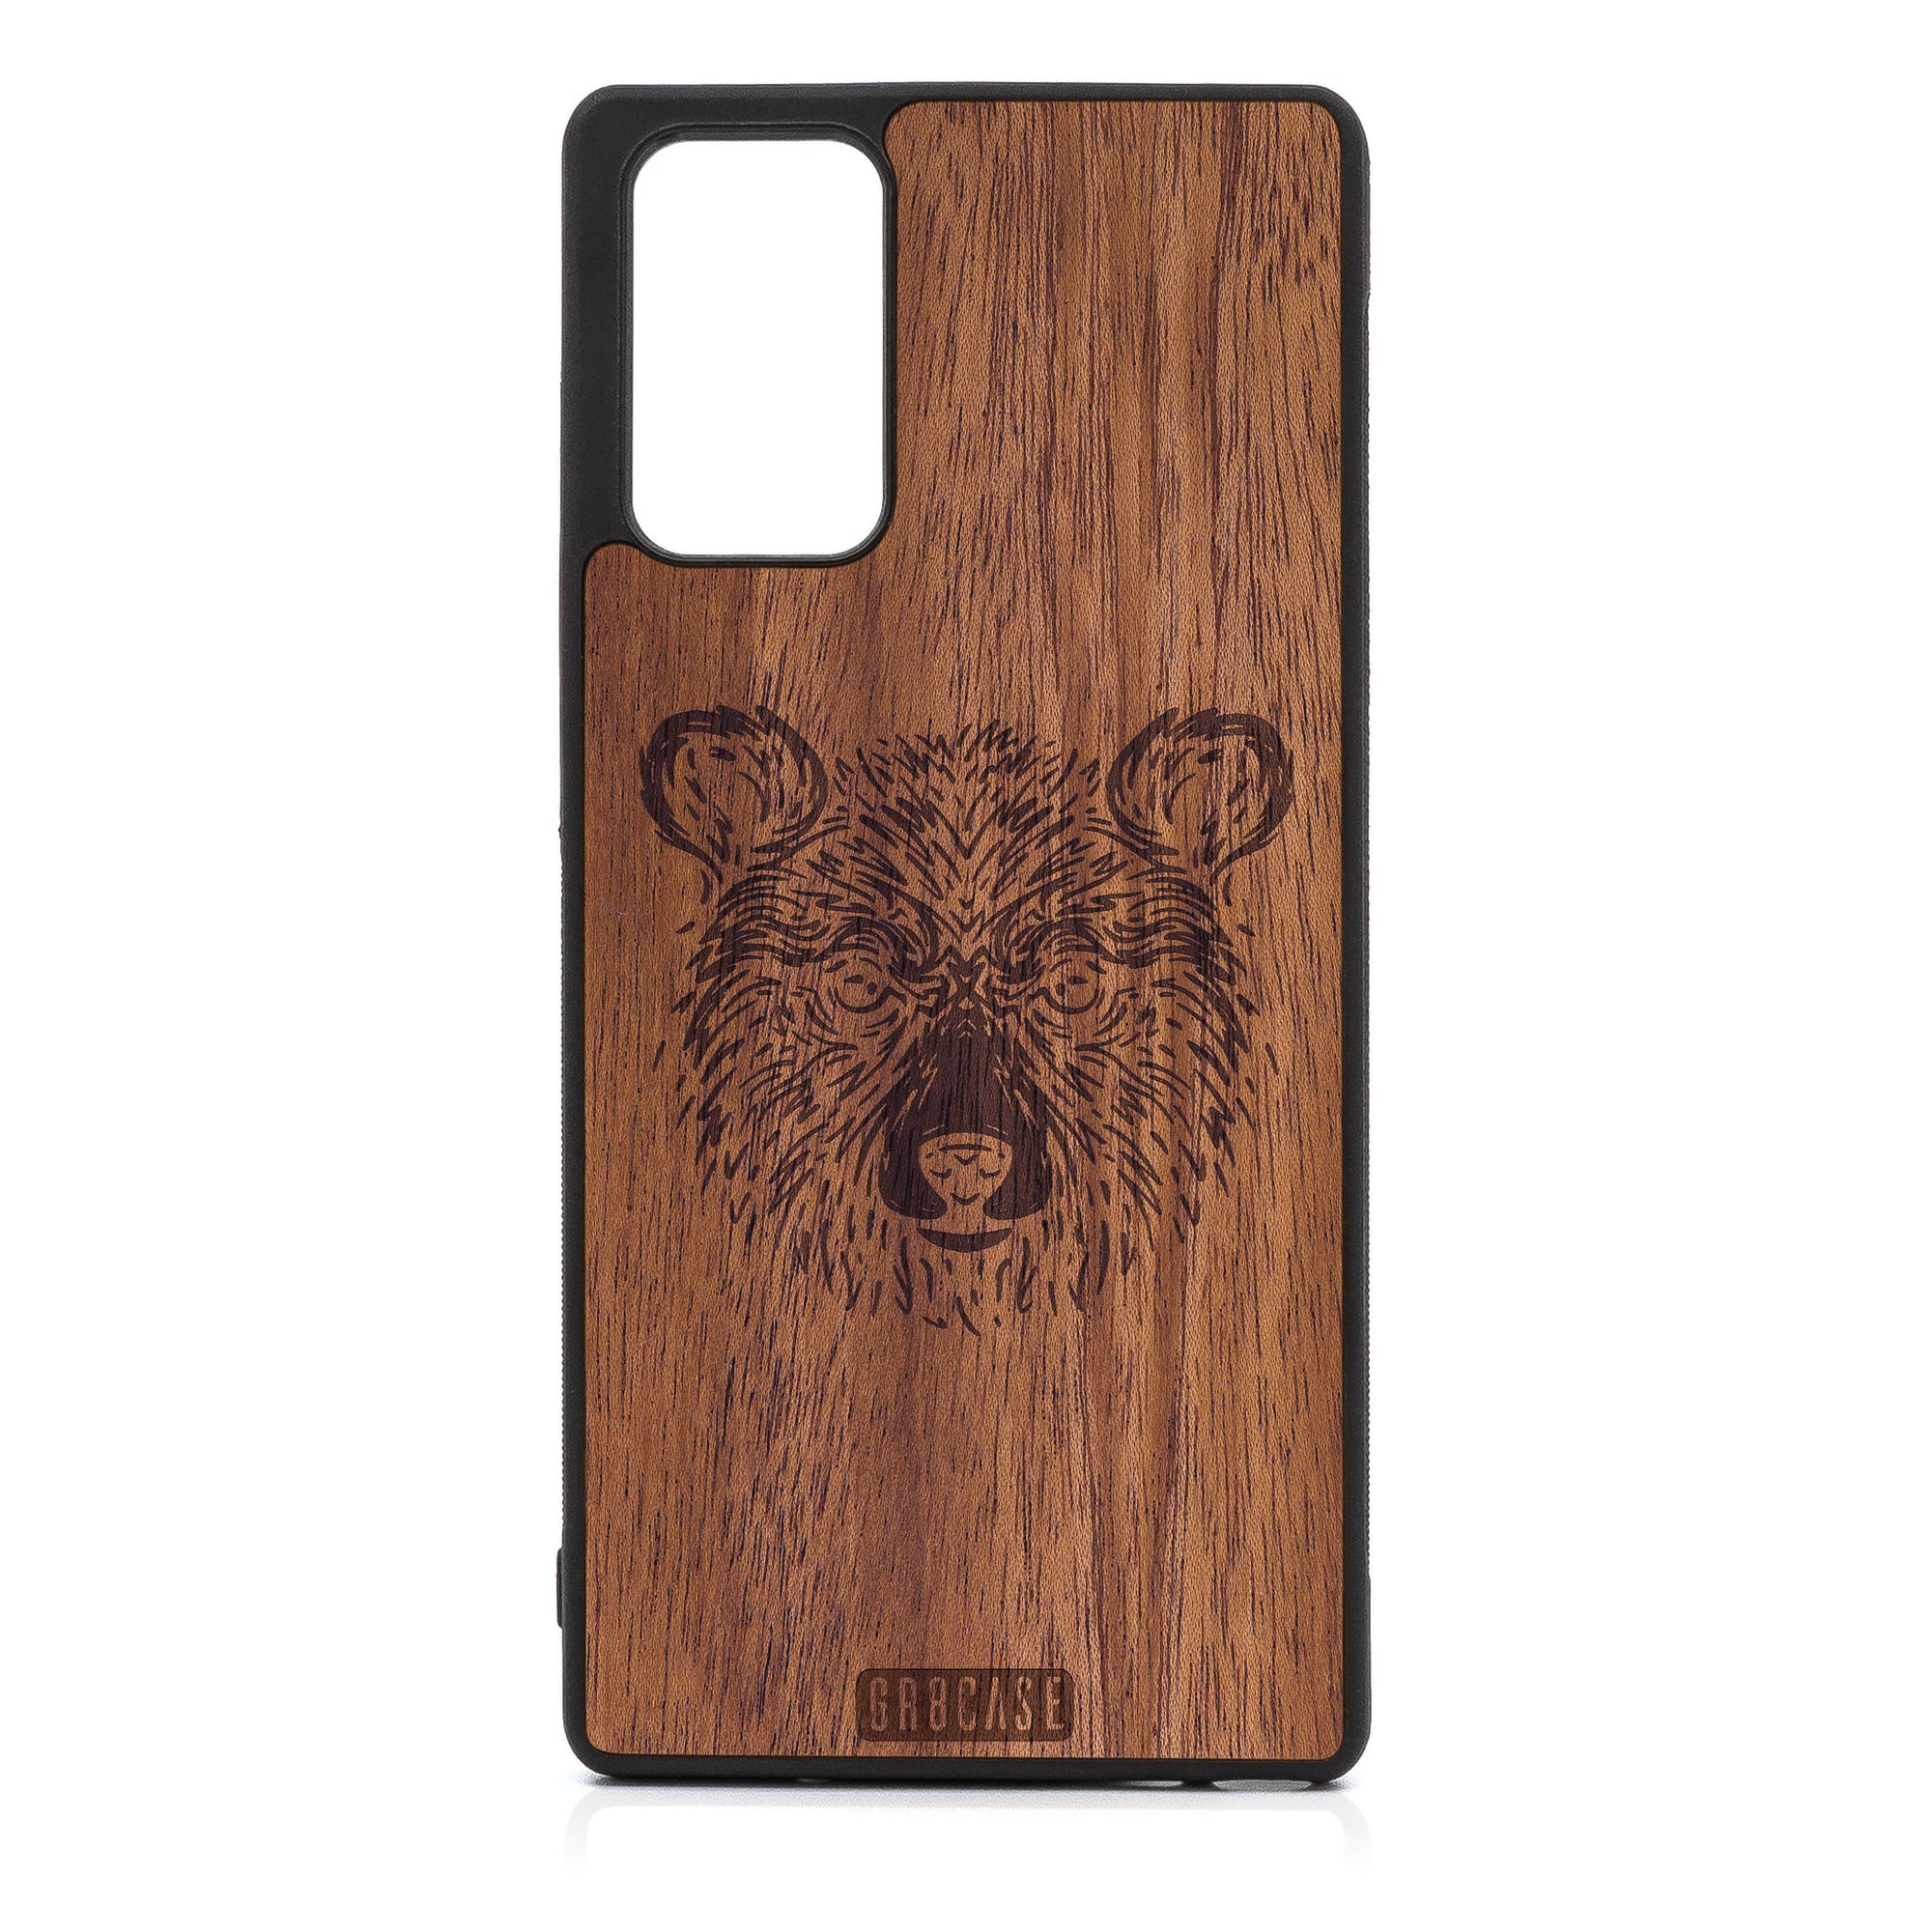 Furry Bear Design Wood Case For Samsung Galaxy Note 20